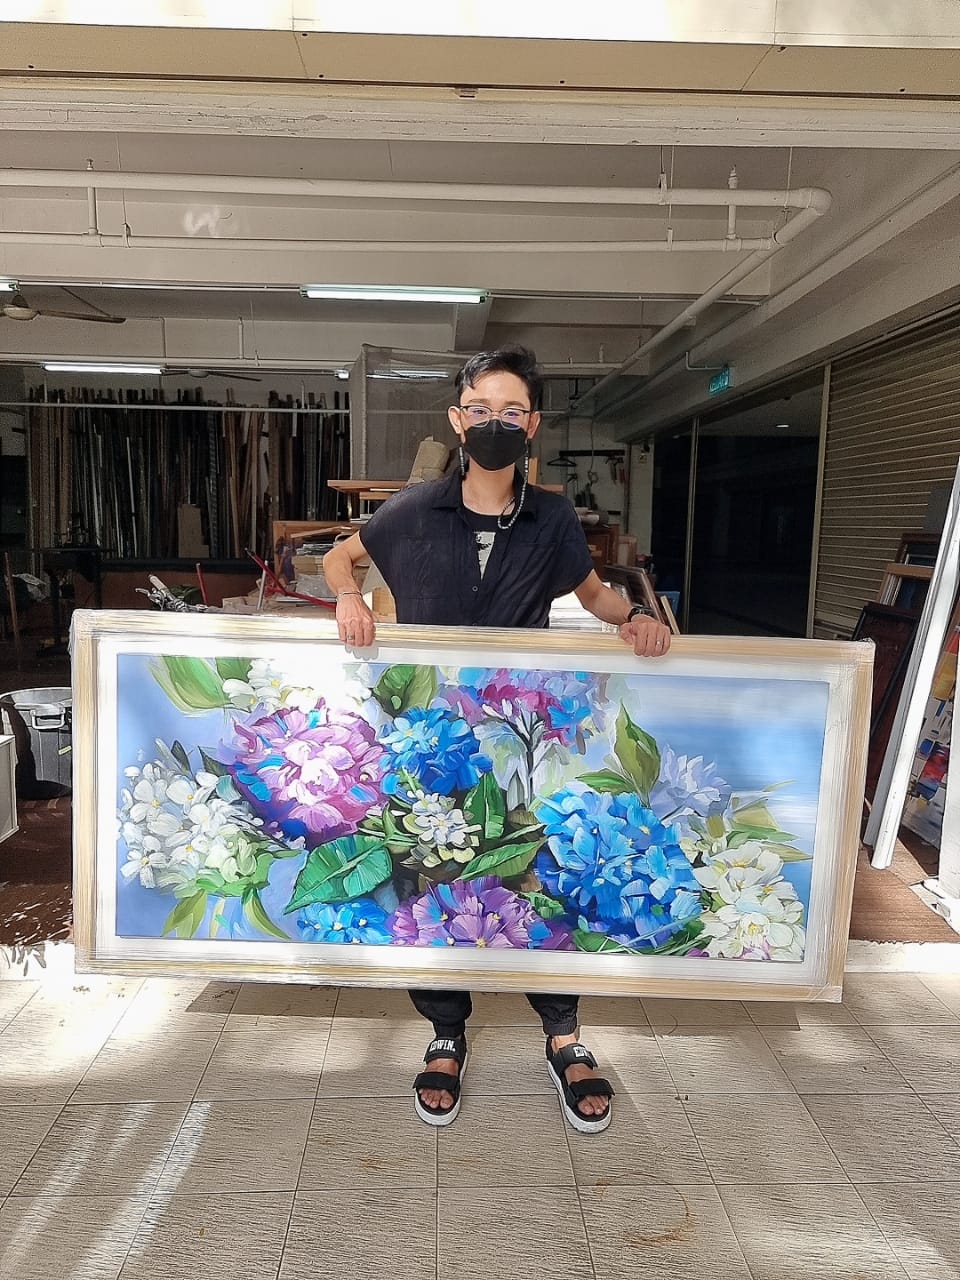 Affordable Custom Made Hand-painted Mo Colourful Hydrangea Flower Oil Painting In Malaysia Office/ Home @ ArtisanMalaysia.com